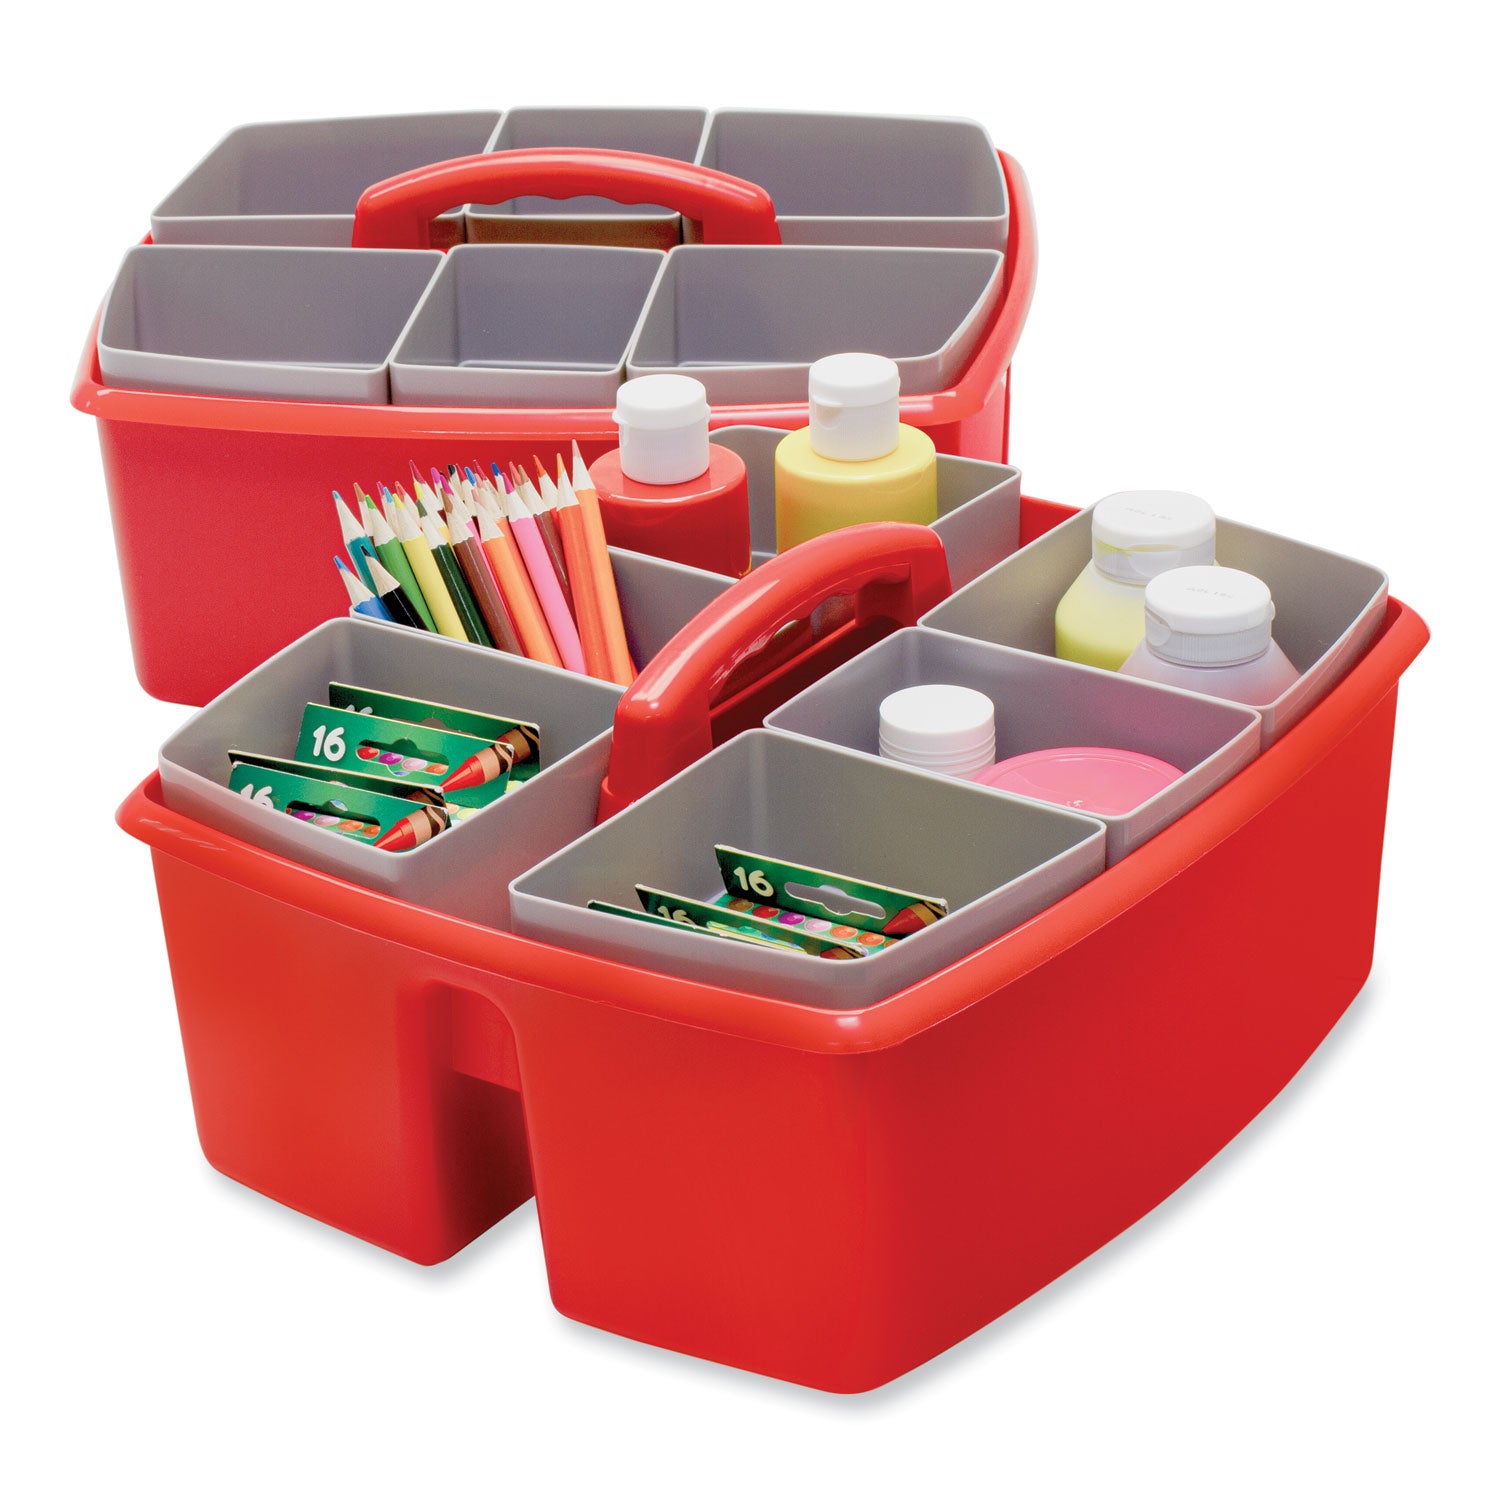 large-caddy-with-sorting-cups-red-2-carton_stx00981u02c - 8